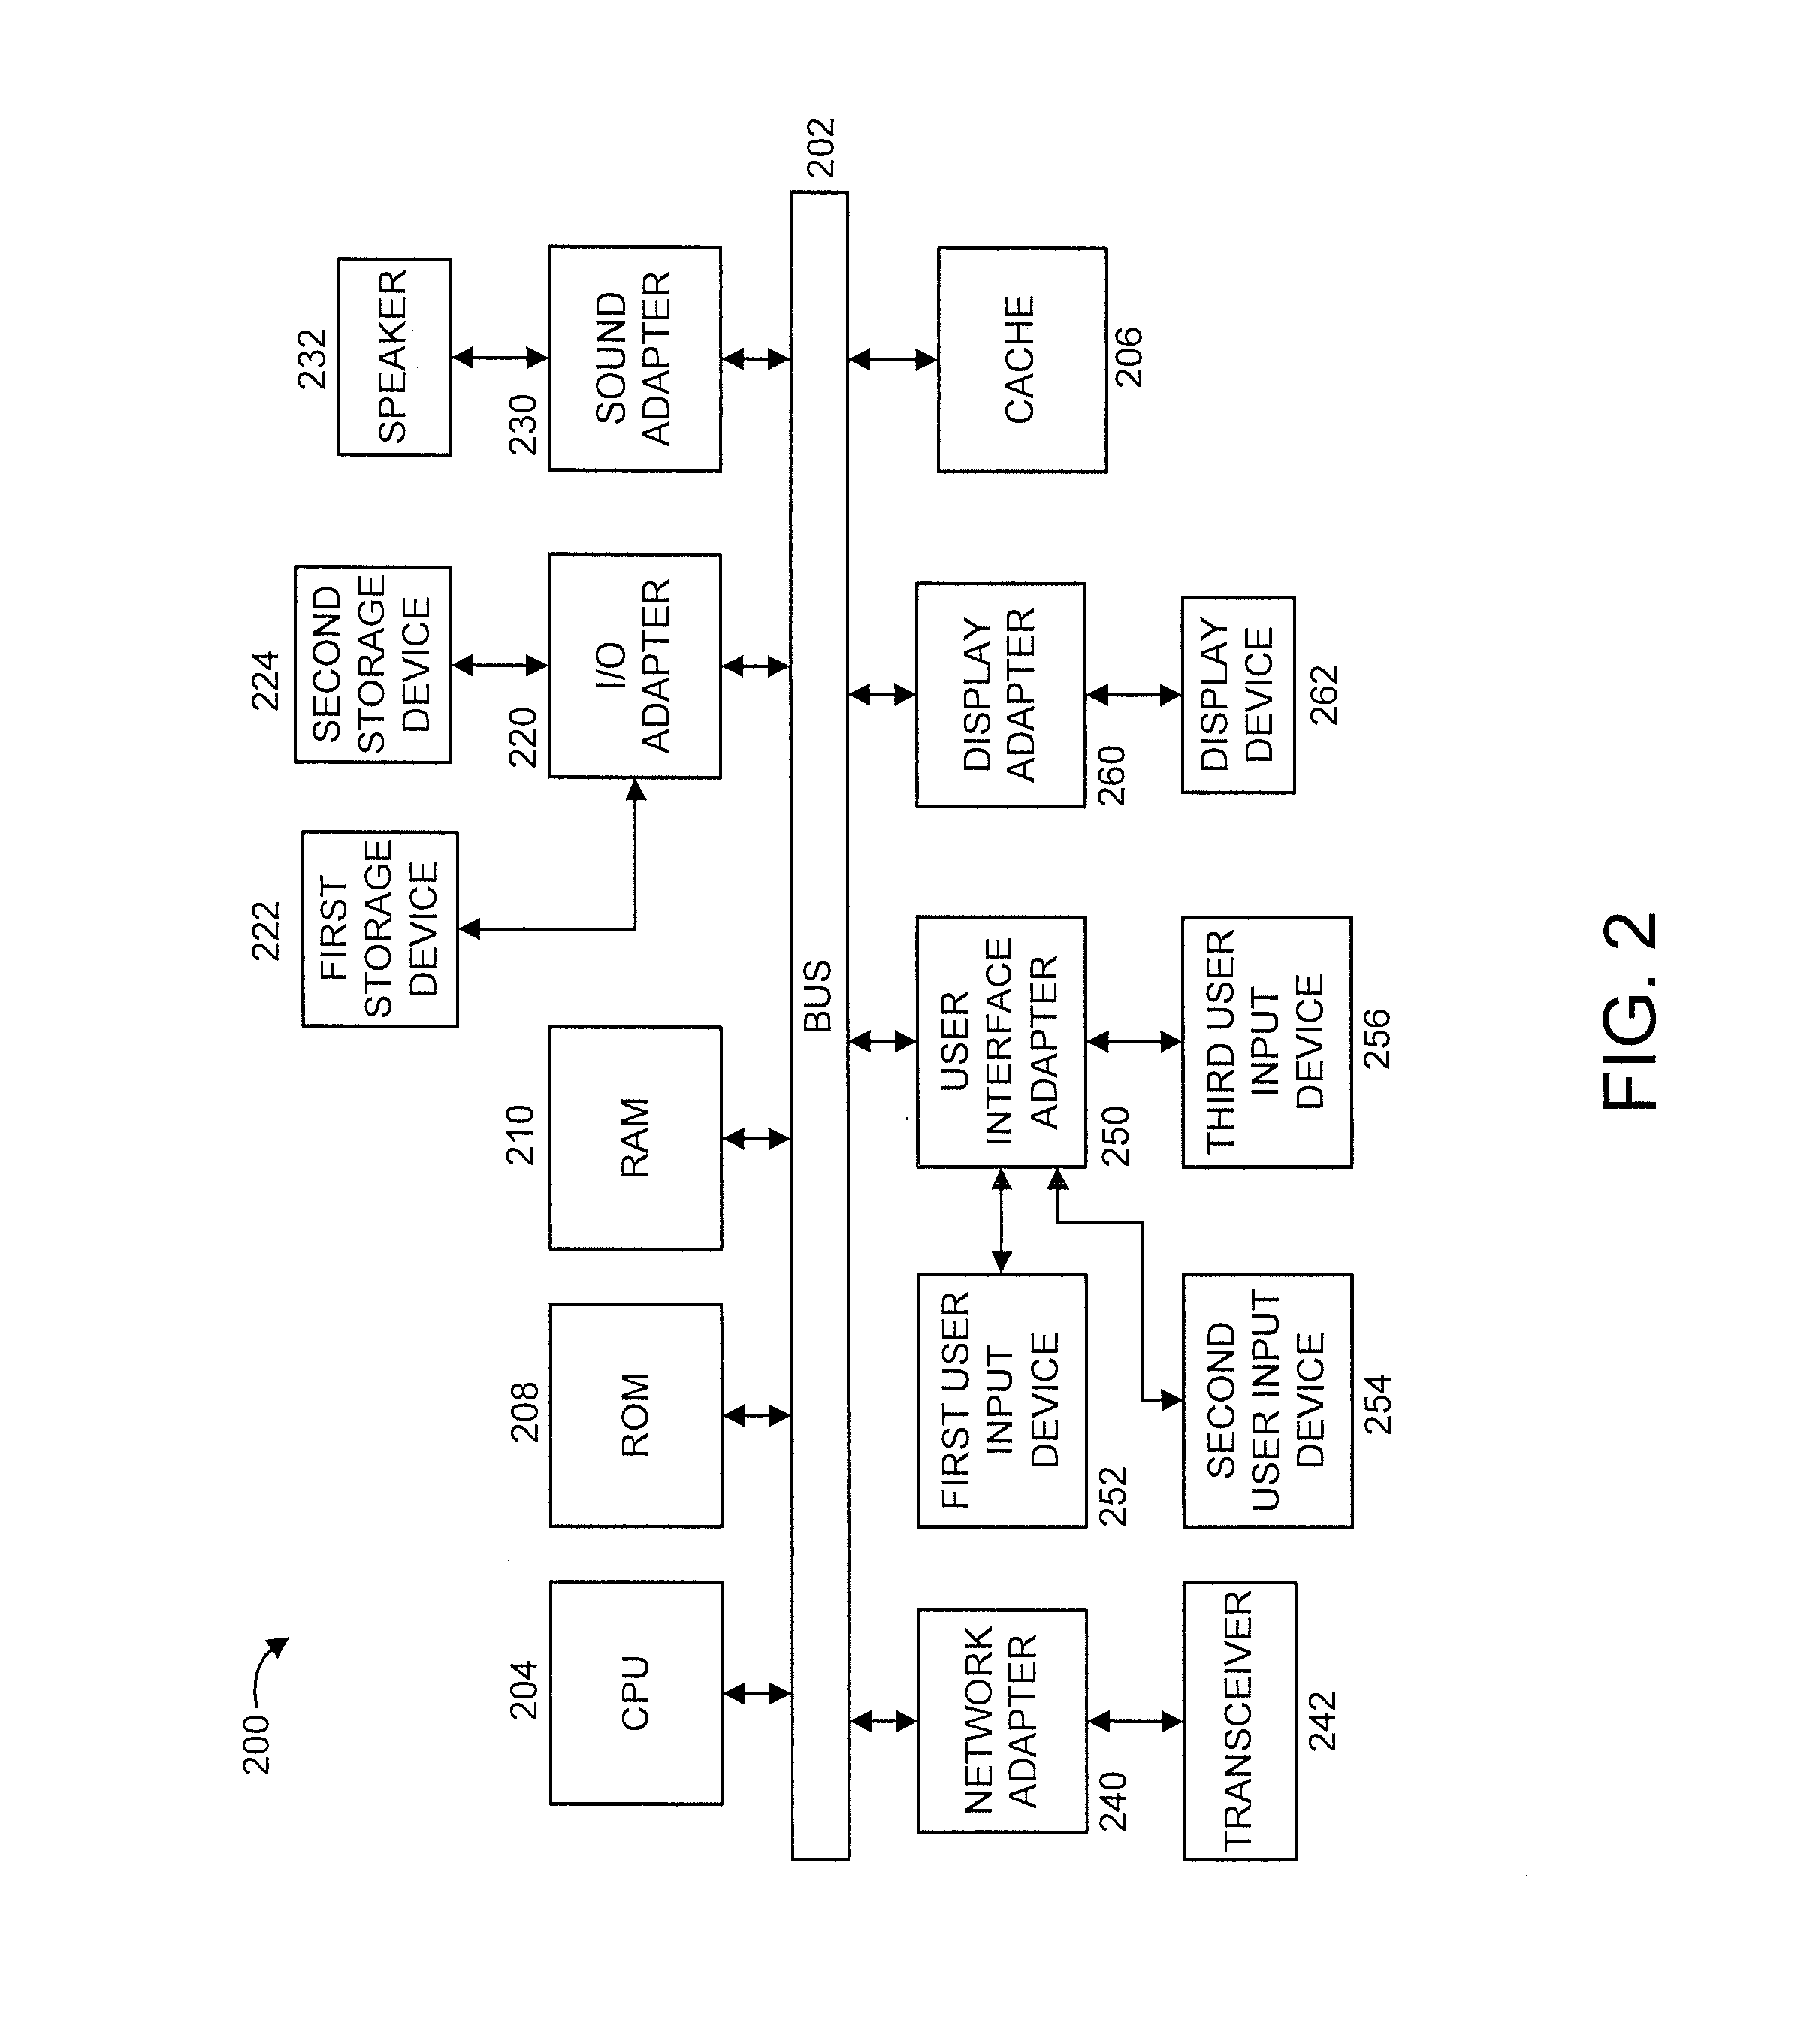 Simultaneous finish of stores and dependent loads